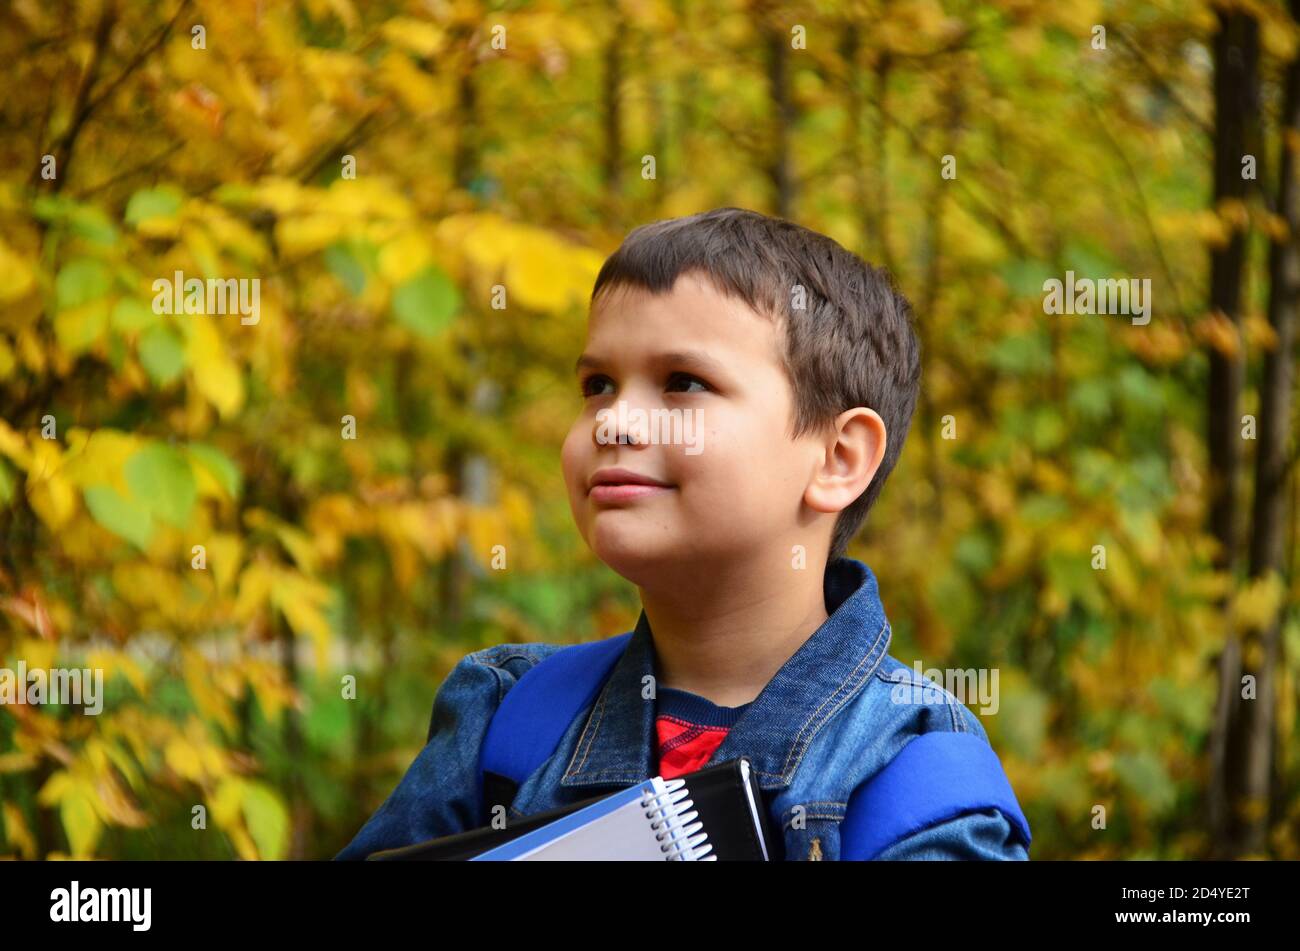 A boy after school hours walks in the autumn park in a denim jacket, with textbooks and notepads, notebooks in his hands in the park among the trees Stock Photo